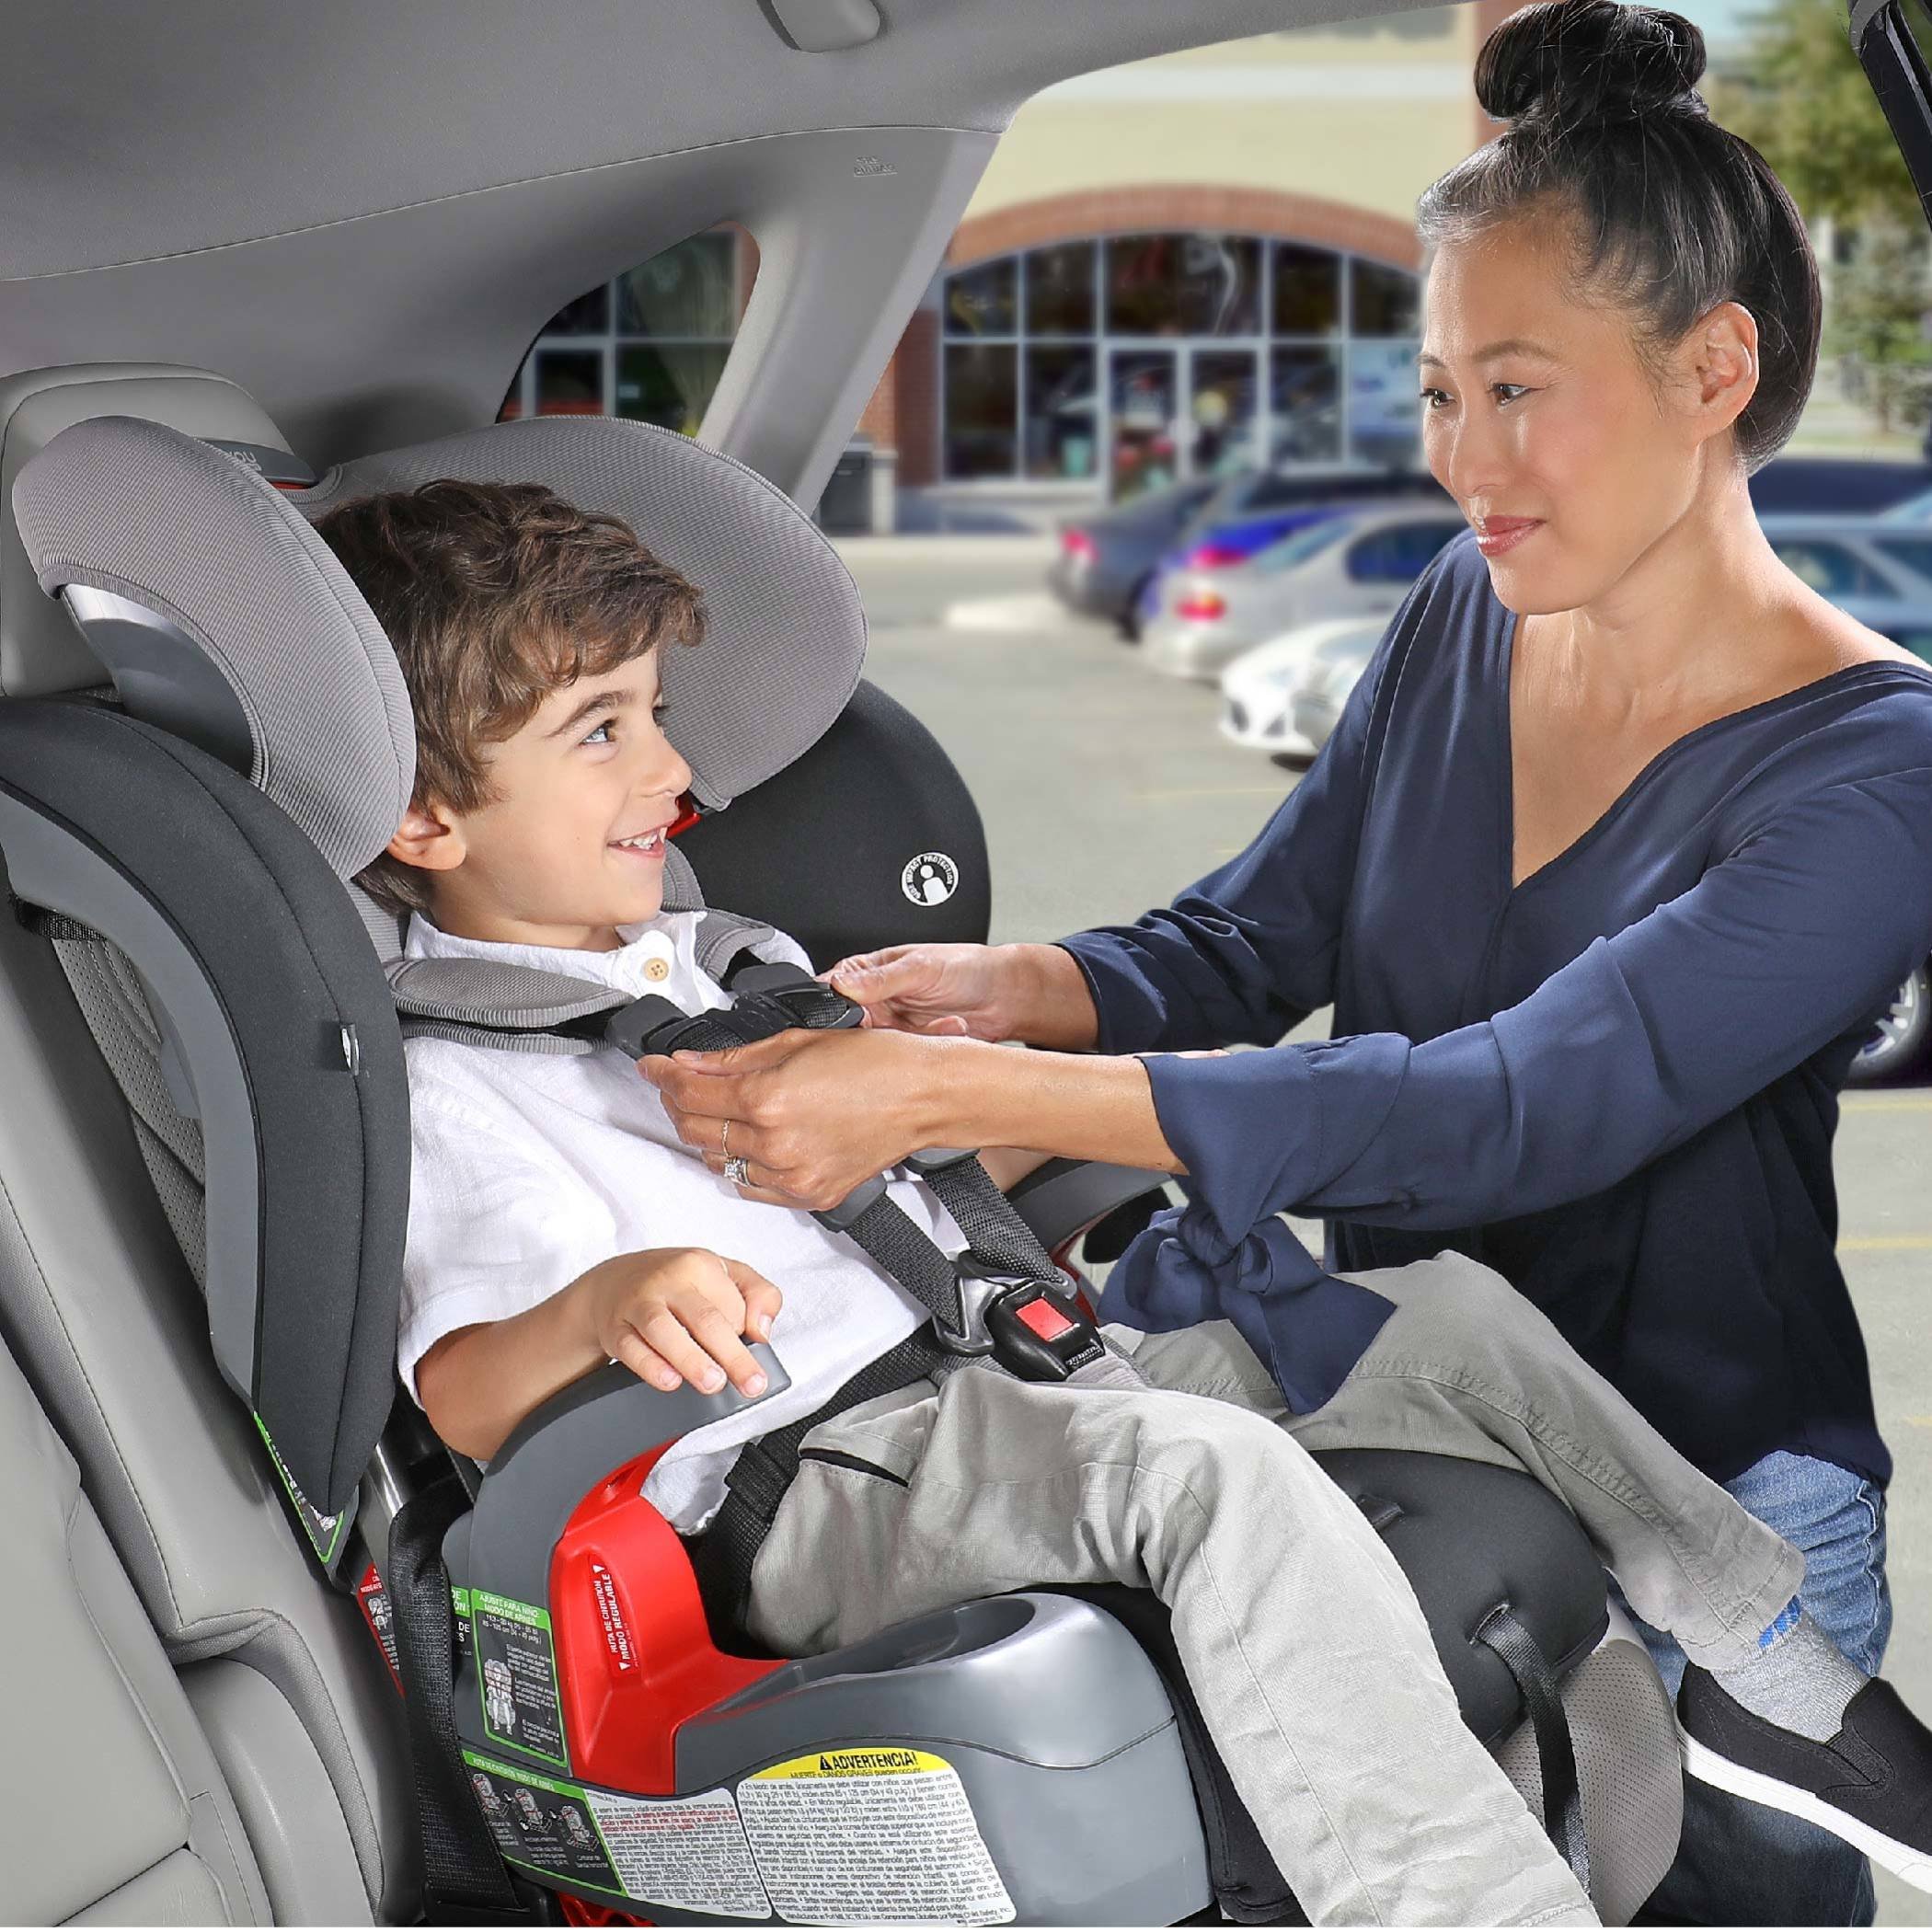 Mother adjusting the Harness on her childs harness-2-booster car seat